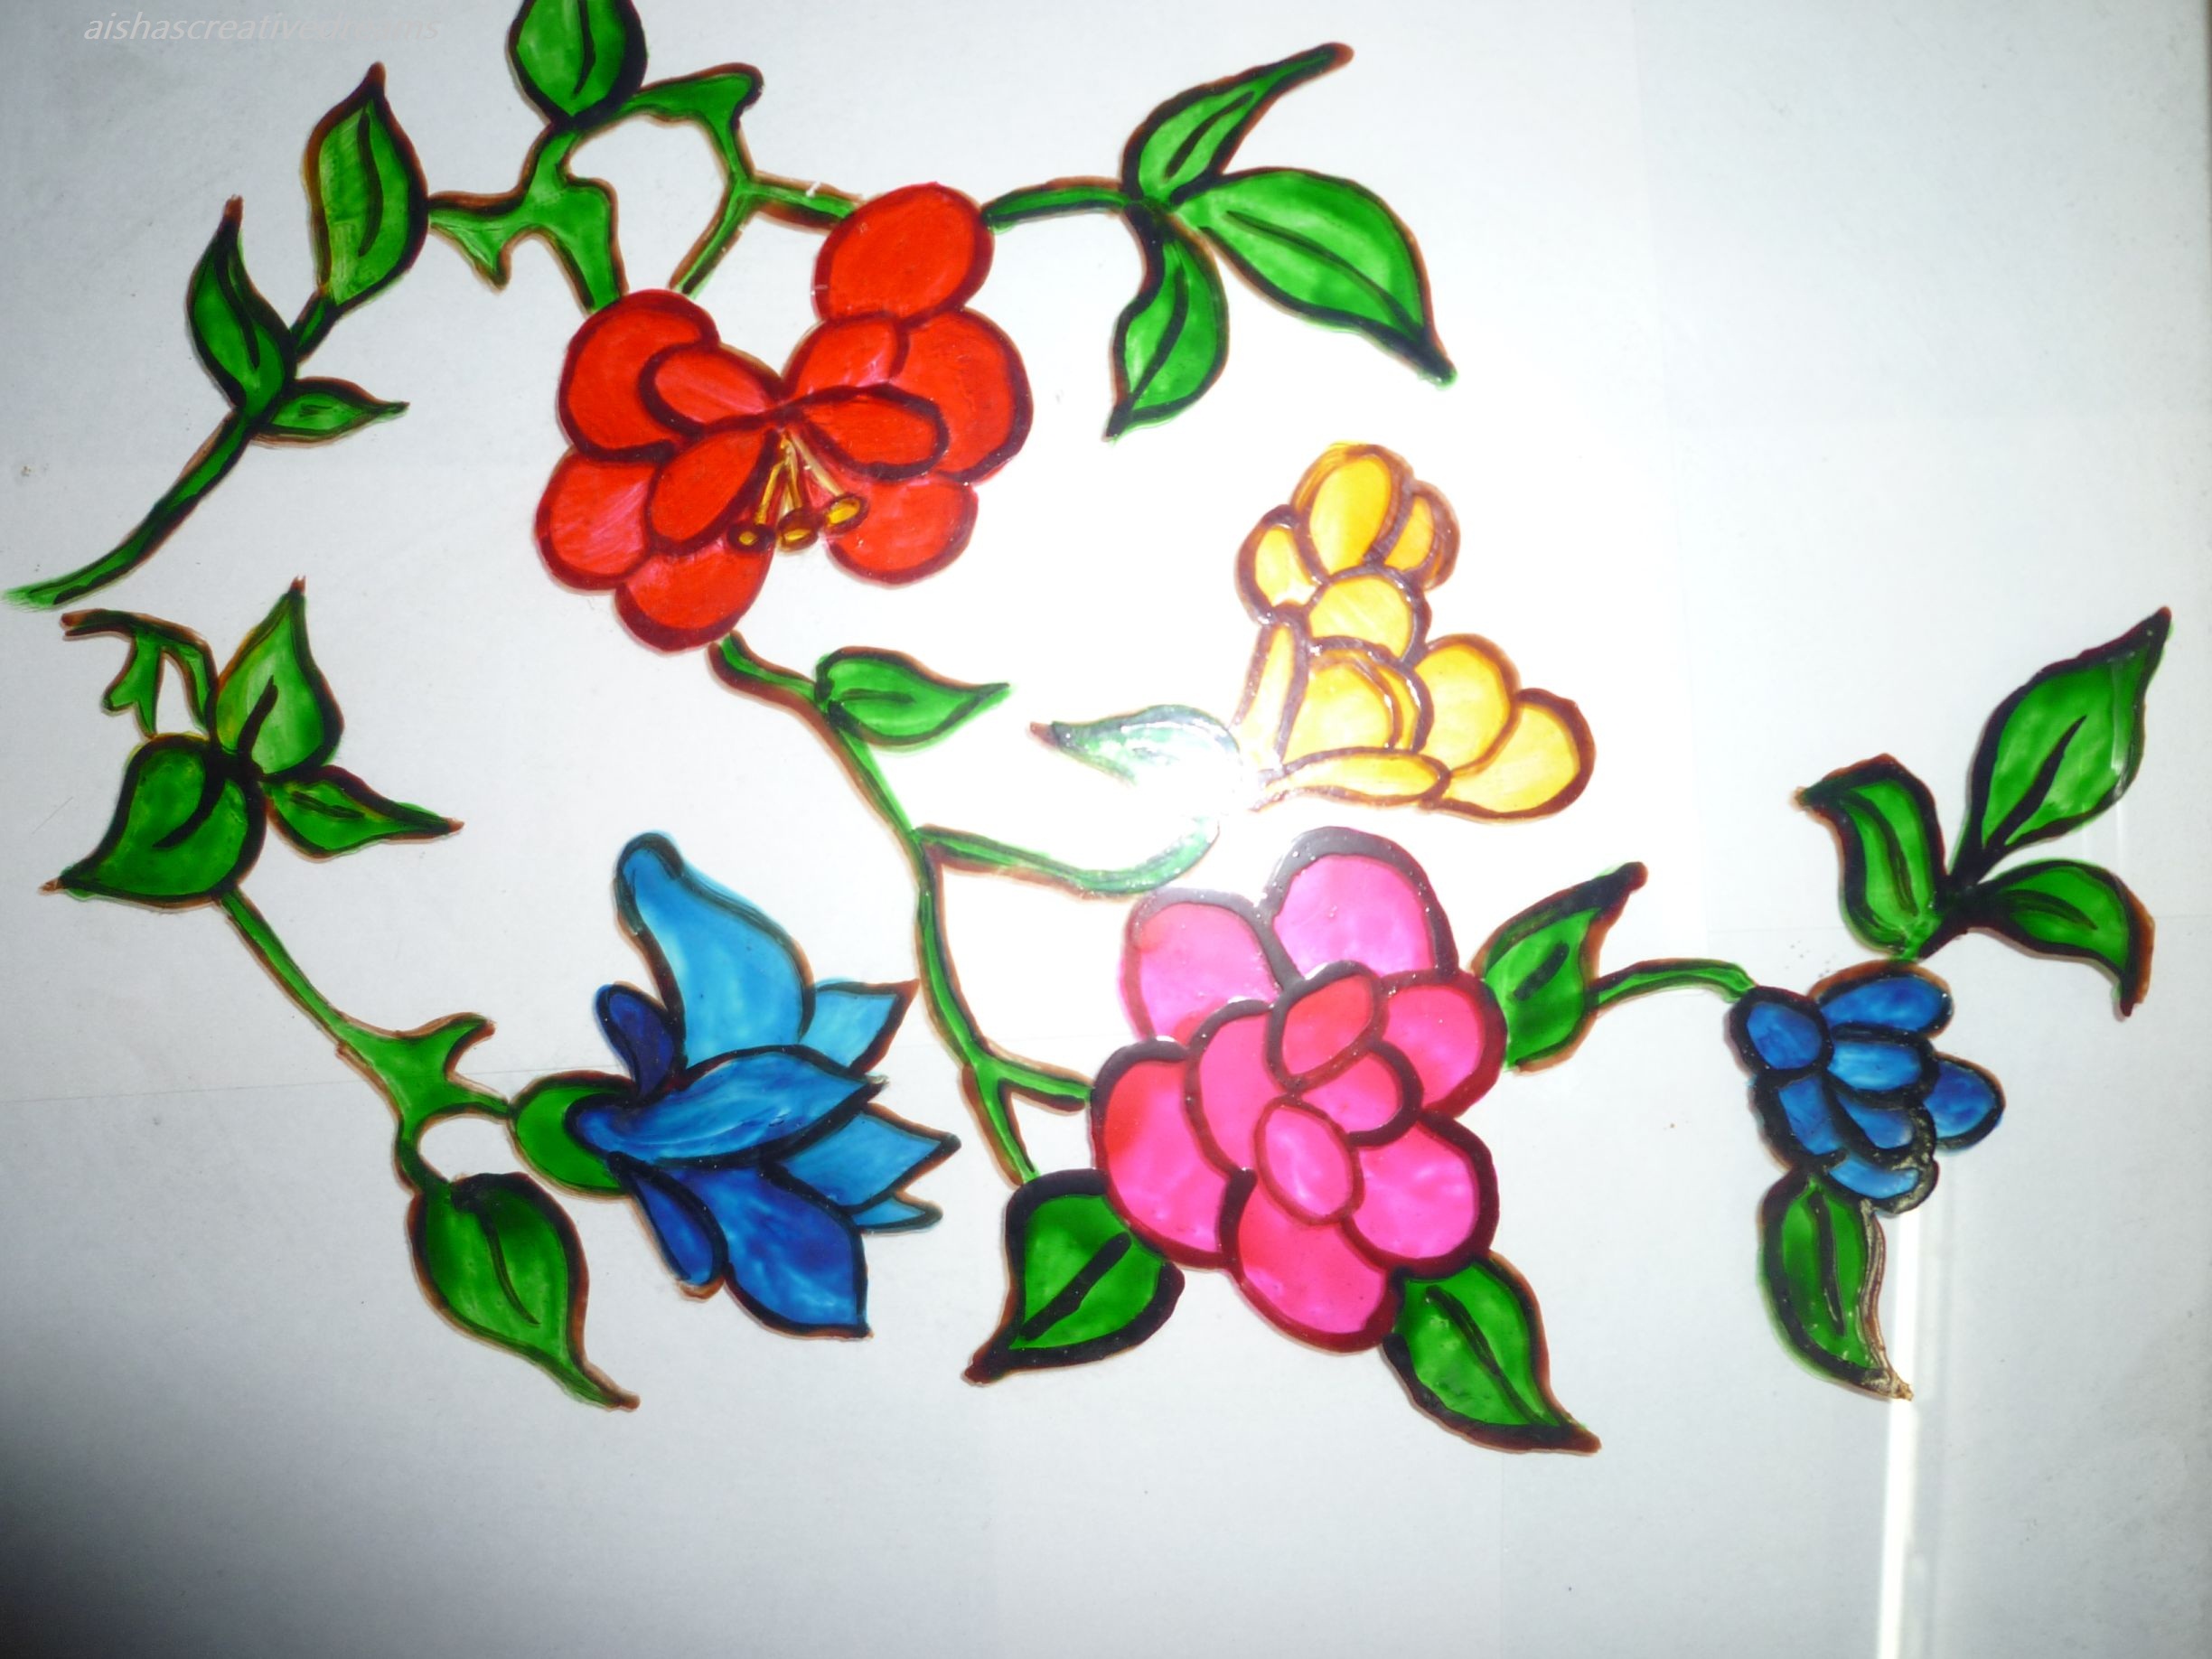 Flower Glass Painting Aaishascreativedreams,Different Type Of Letter Designs